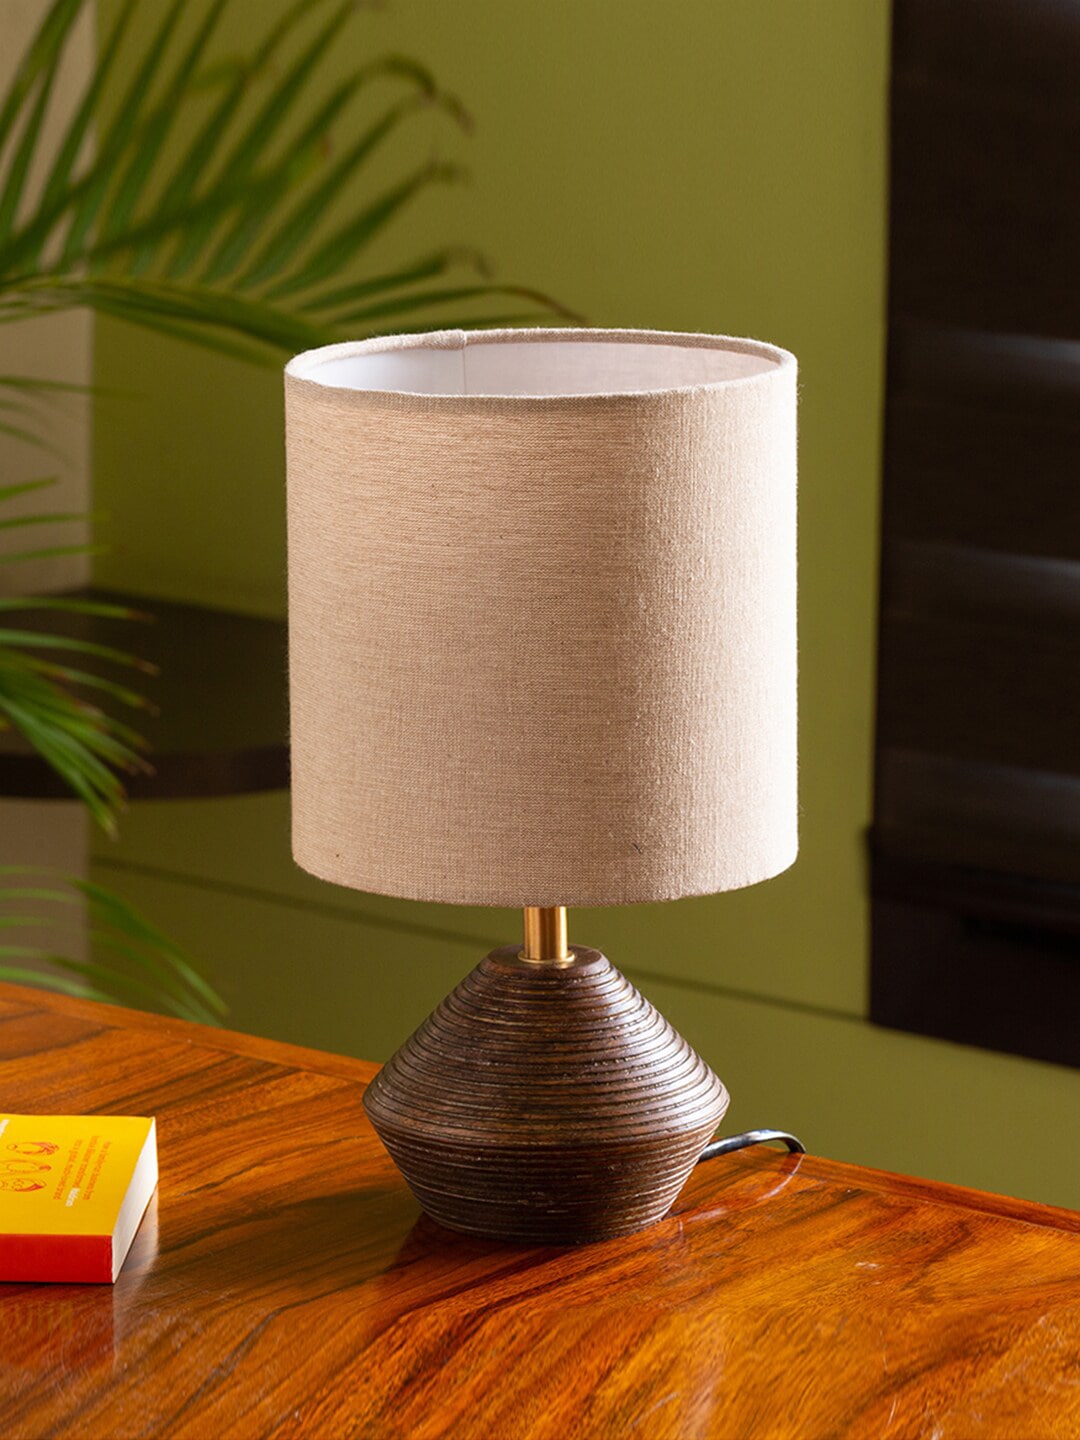 ExclusiveLane Cream-Coloured & Brown Contemporary USP Handcrafted Wooden Table Lamp Price in India